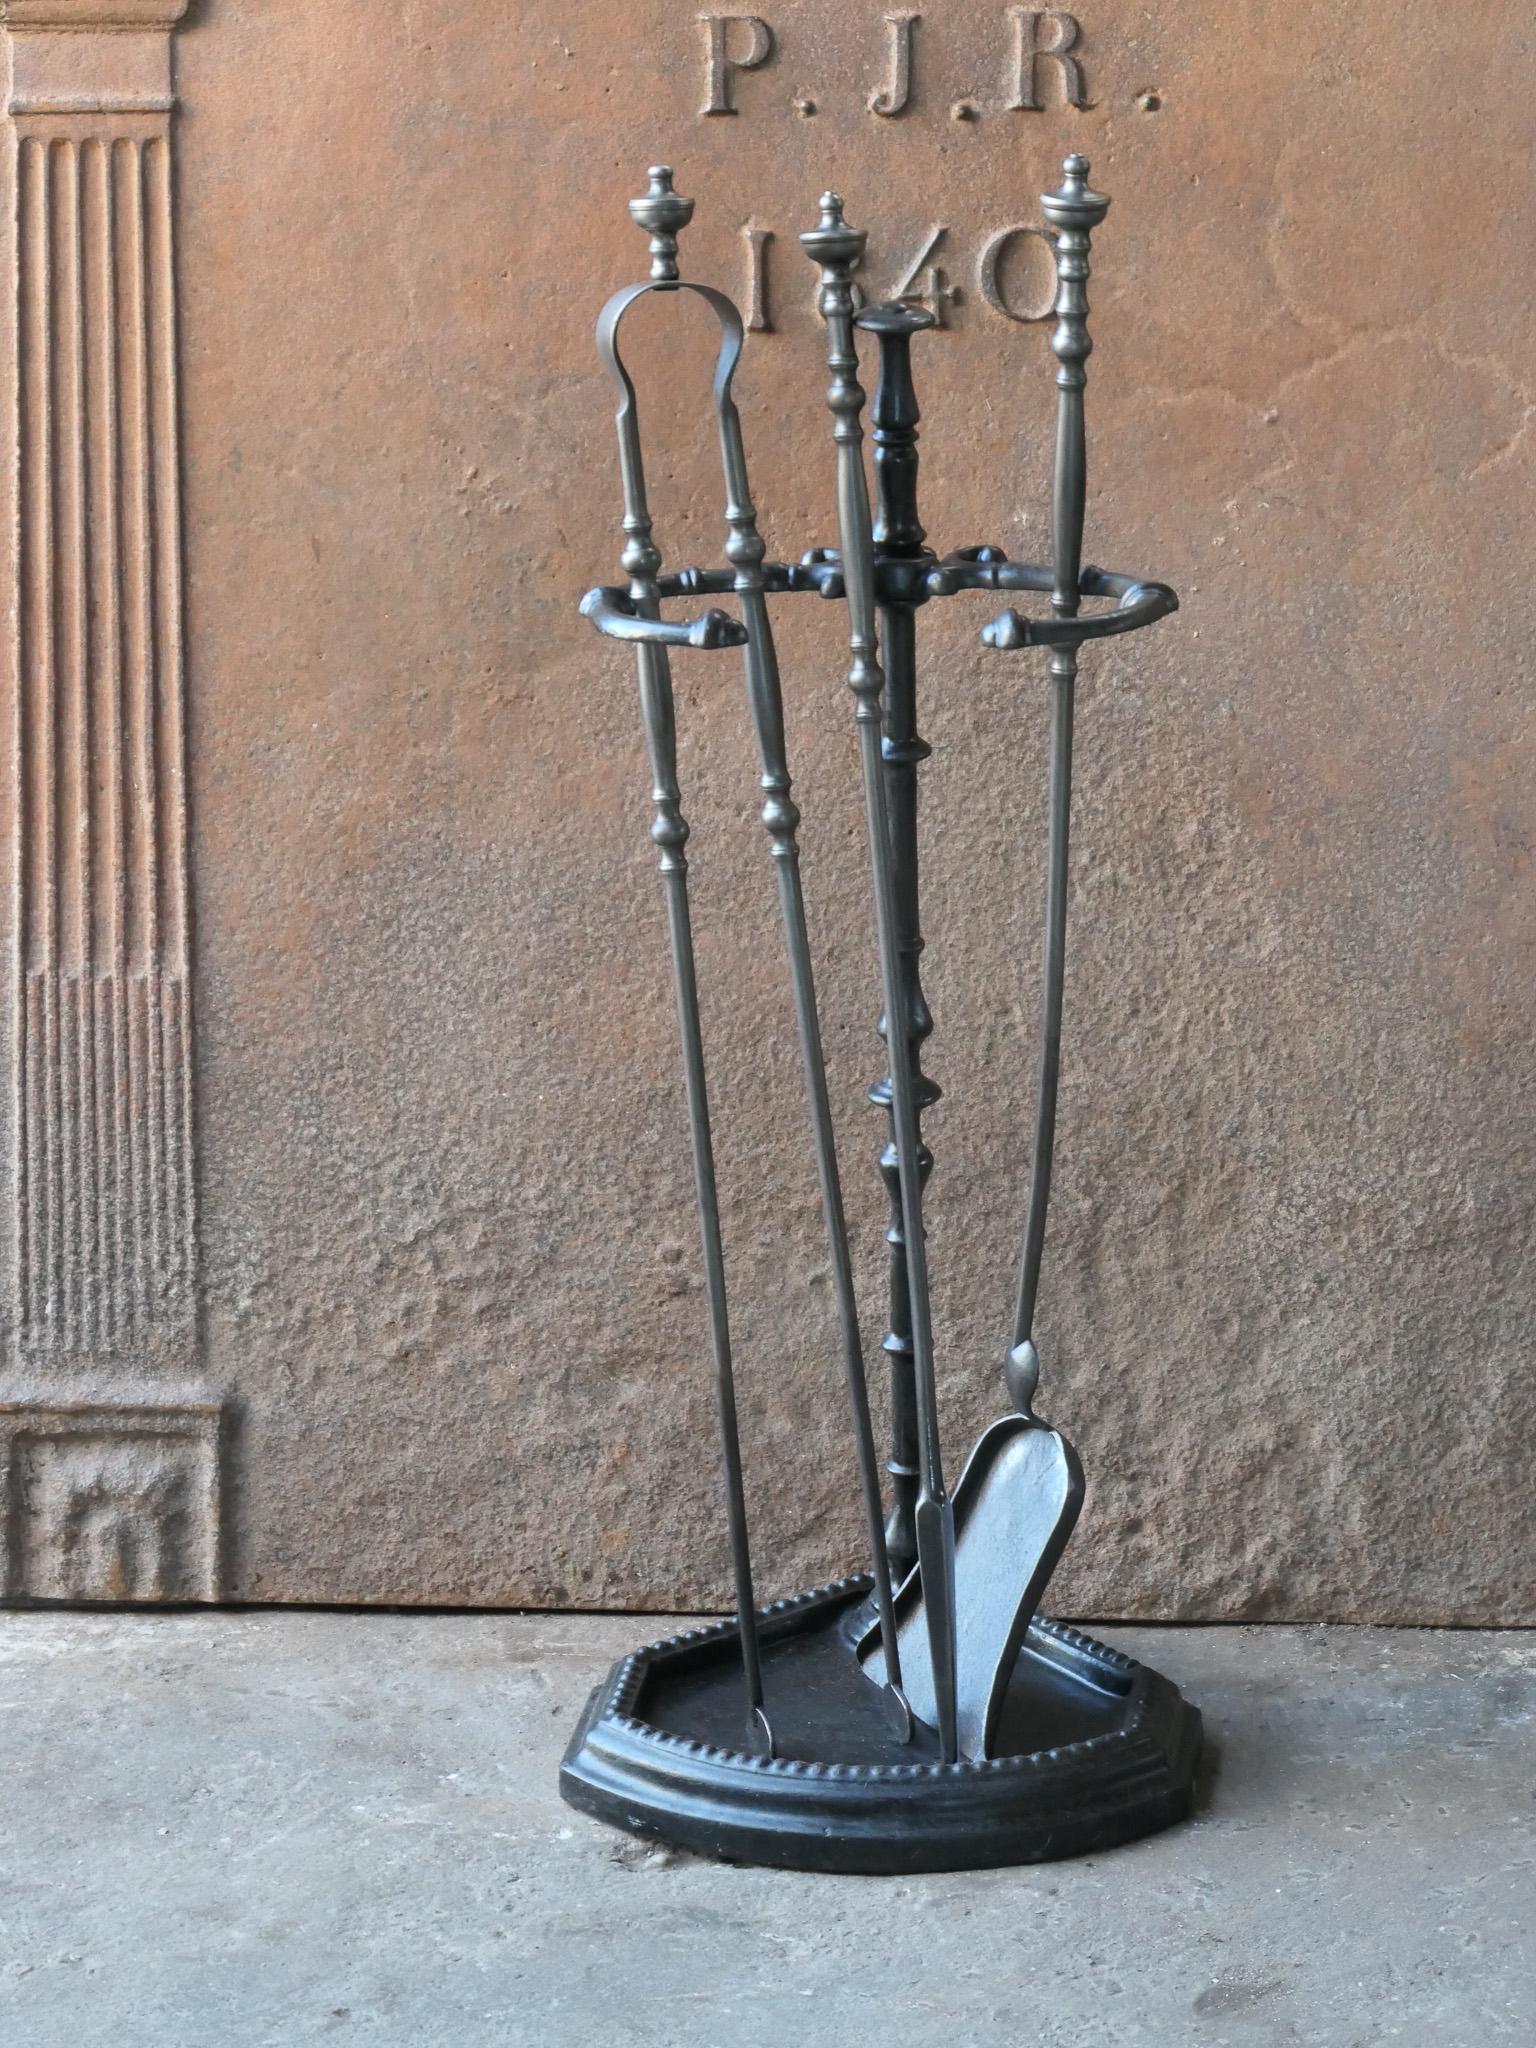 19th century French fireplace tool set. The tool set consists of tongs, shovel, poker and a stand. The tools are made of wrought iron and the stand of cast iron. The set is in a good condition and fit for use in the fireplace.